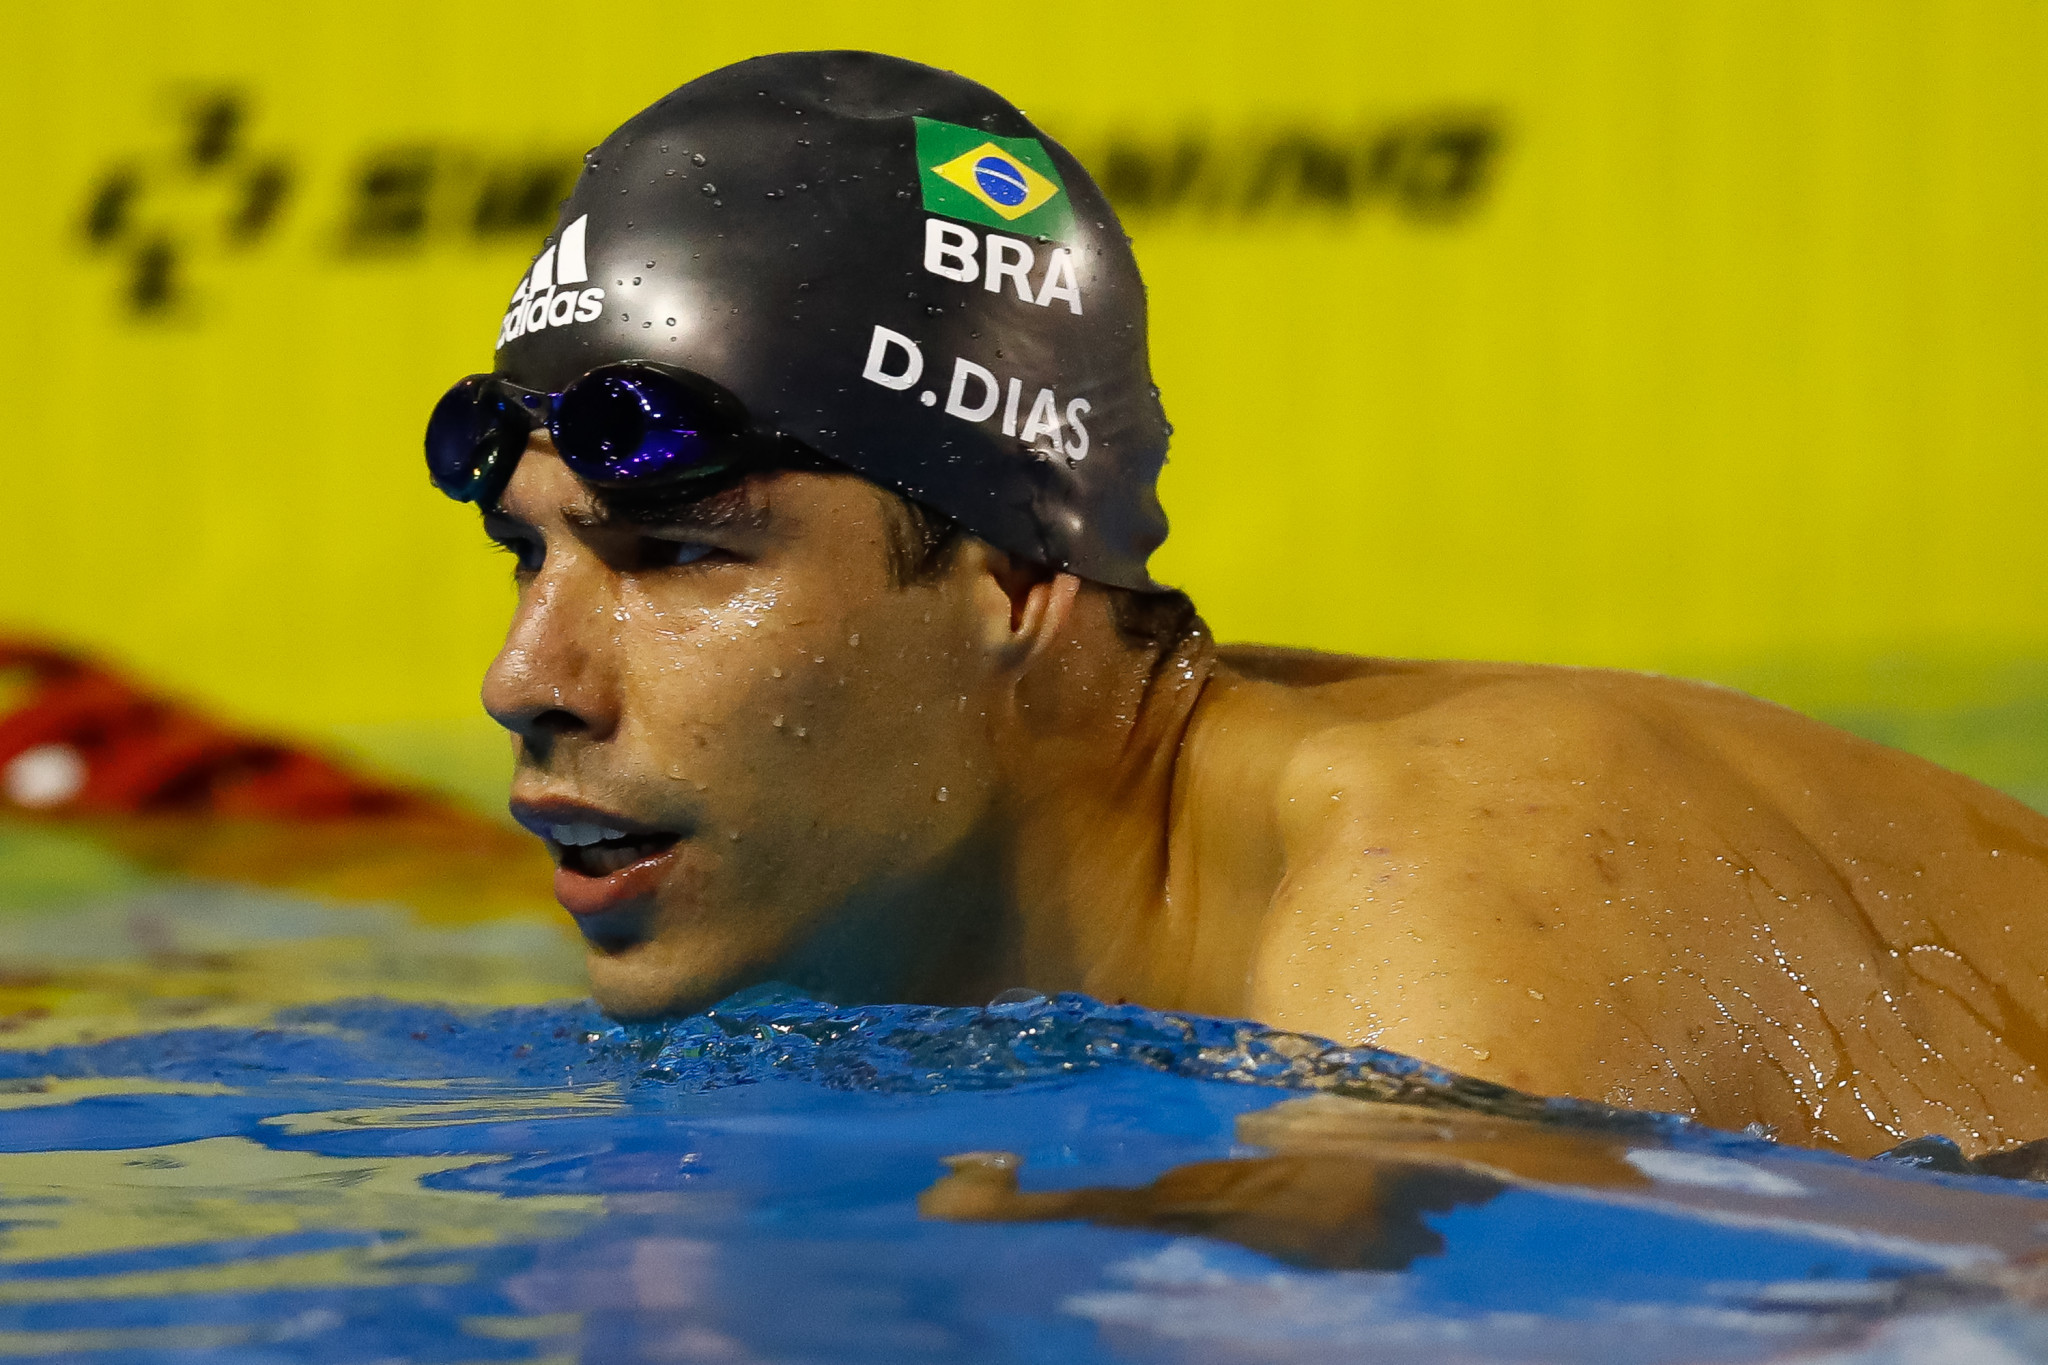 Fourteen-time Paralympic champion Daniel Dias of Brazil was among the gold medallists on day two of the World Para Swimming World Series leg in Sheffield ©Getty Images